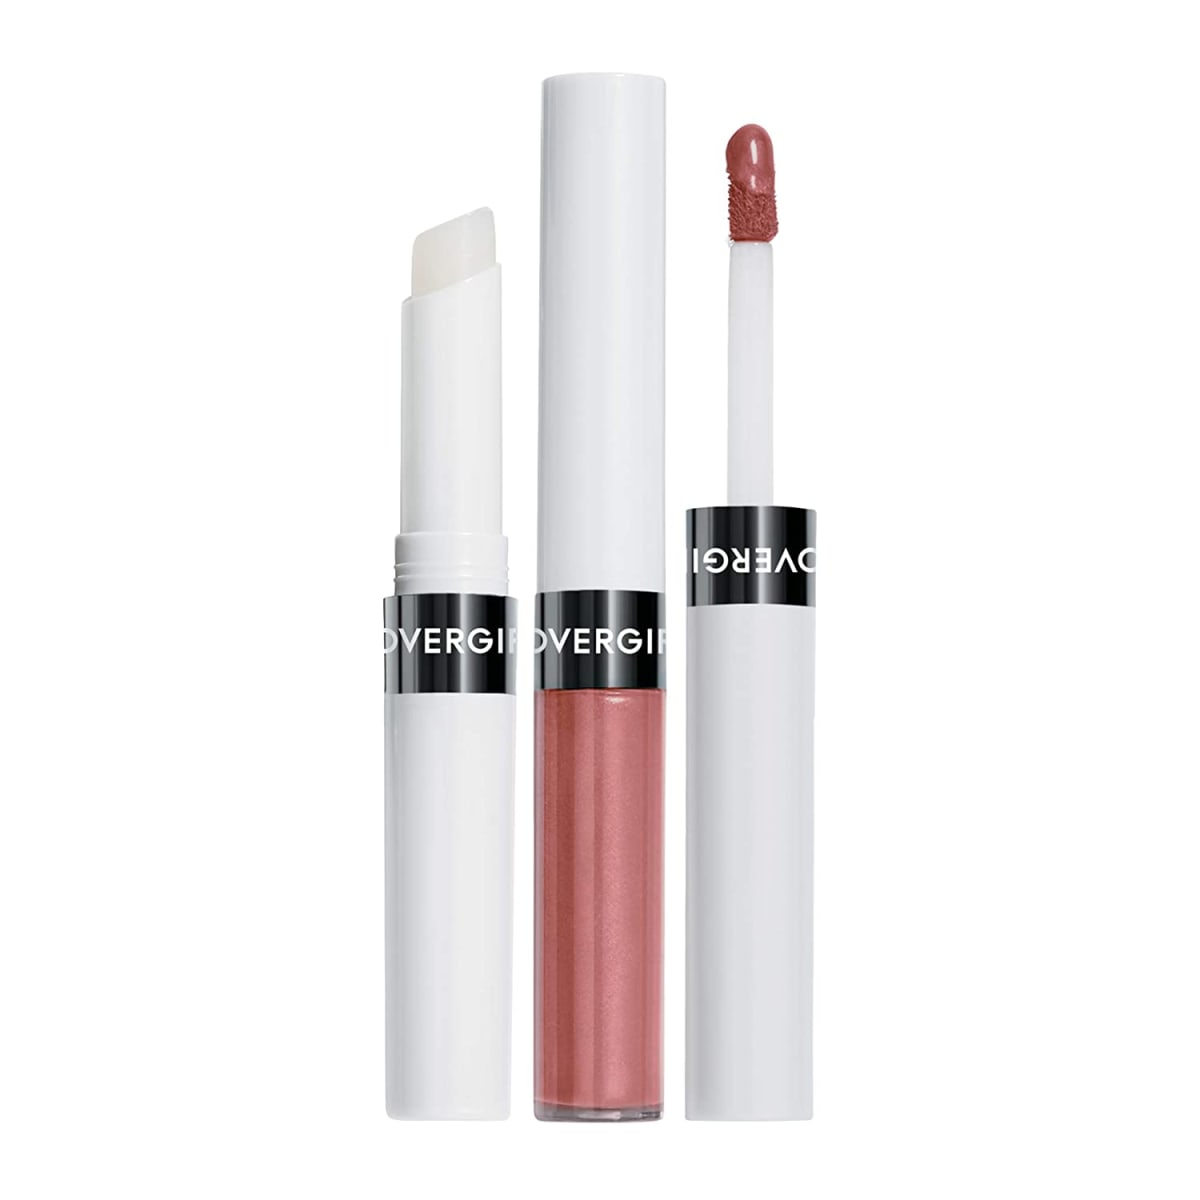 Outlast AllDay Lip Color with Moisturizing Topcoat New Neutrals Shade Collection 120 Dusty Blush